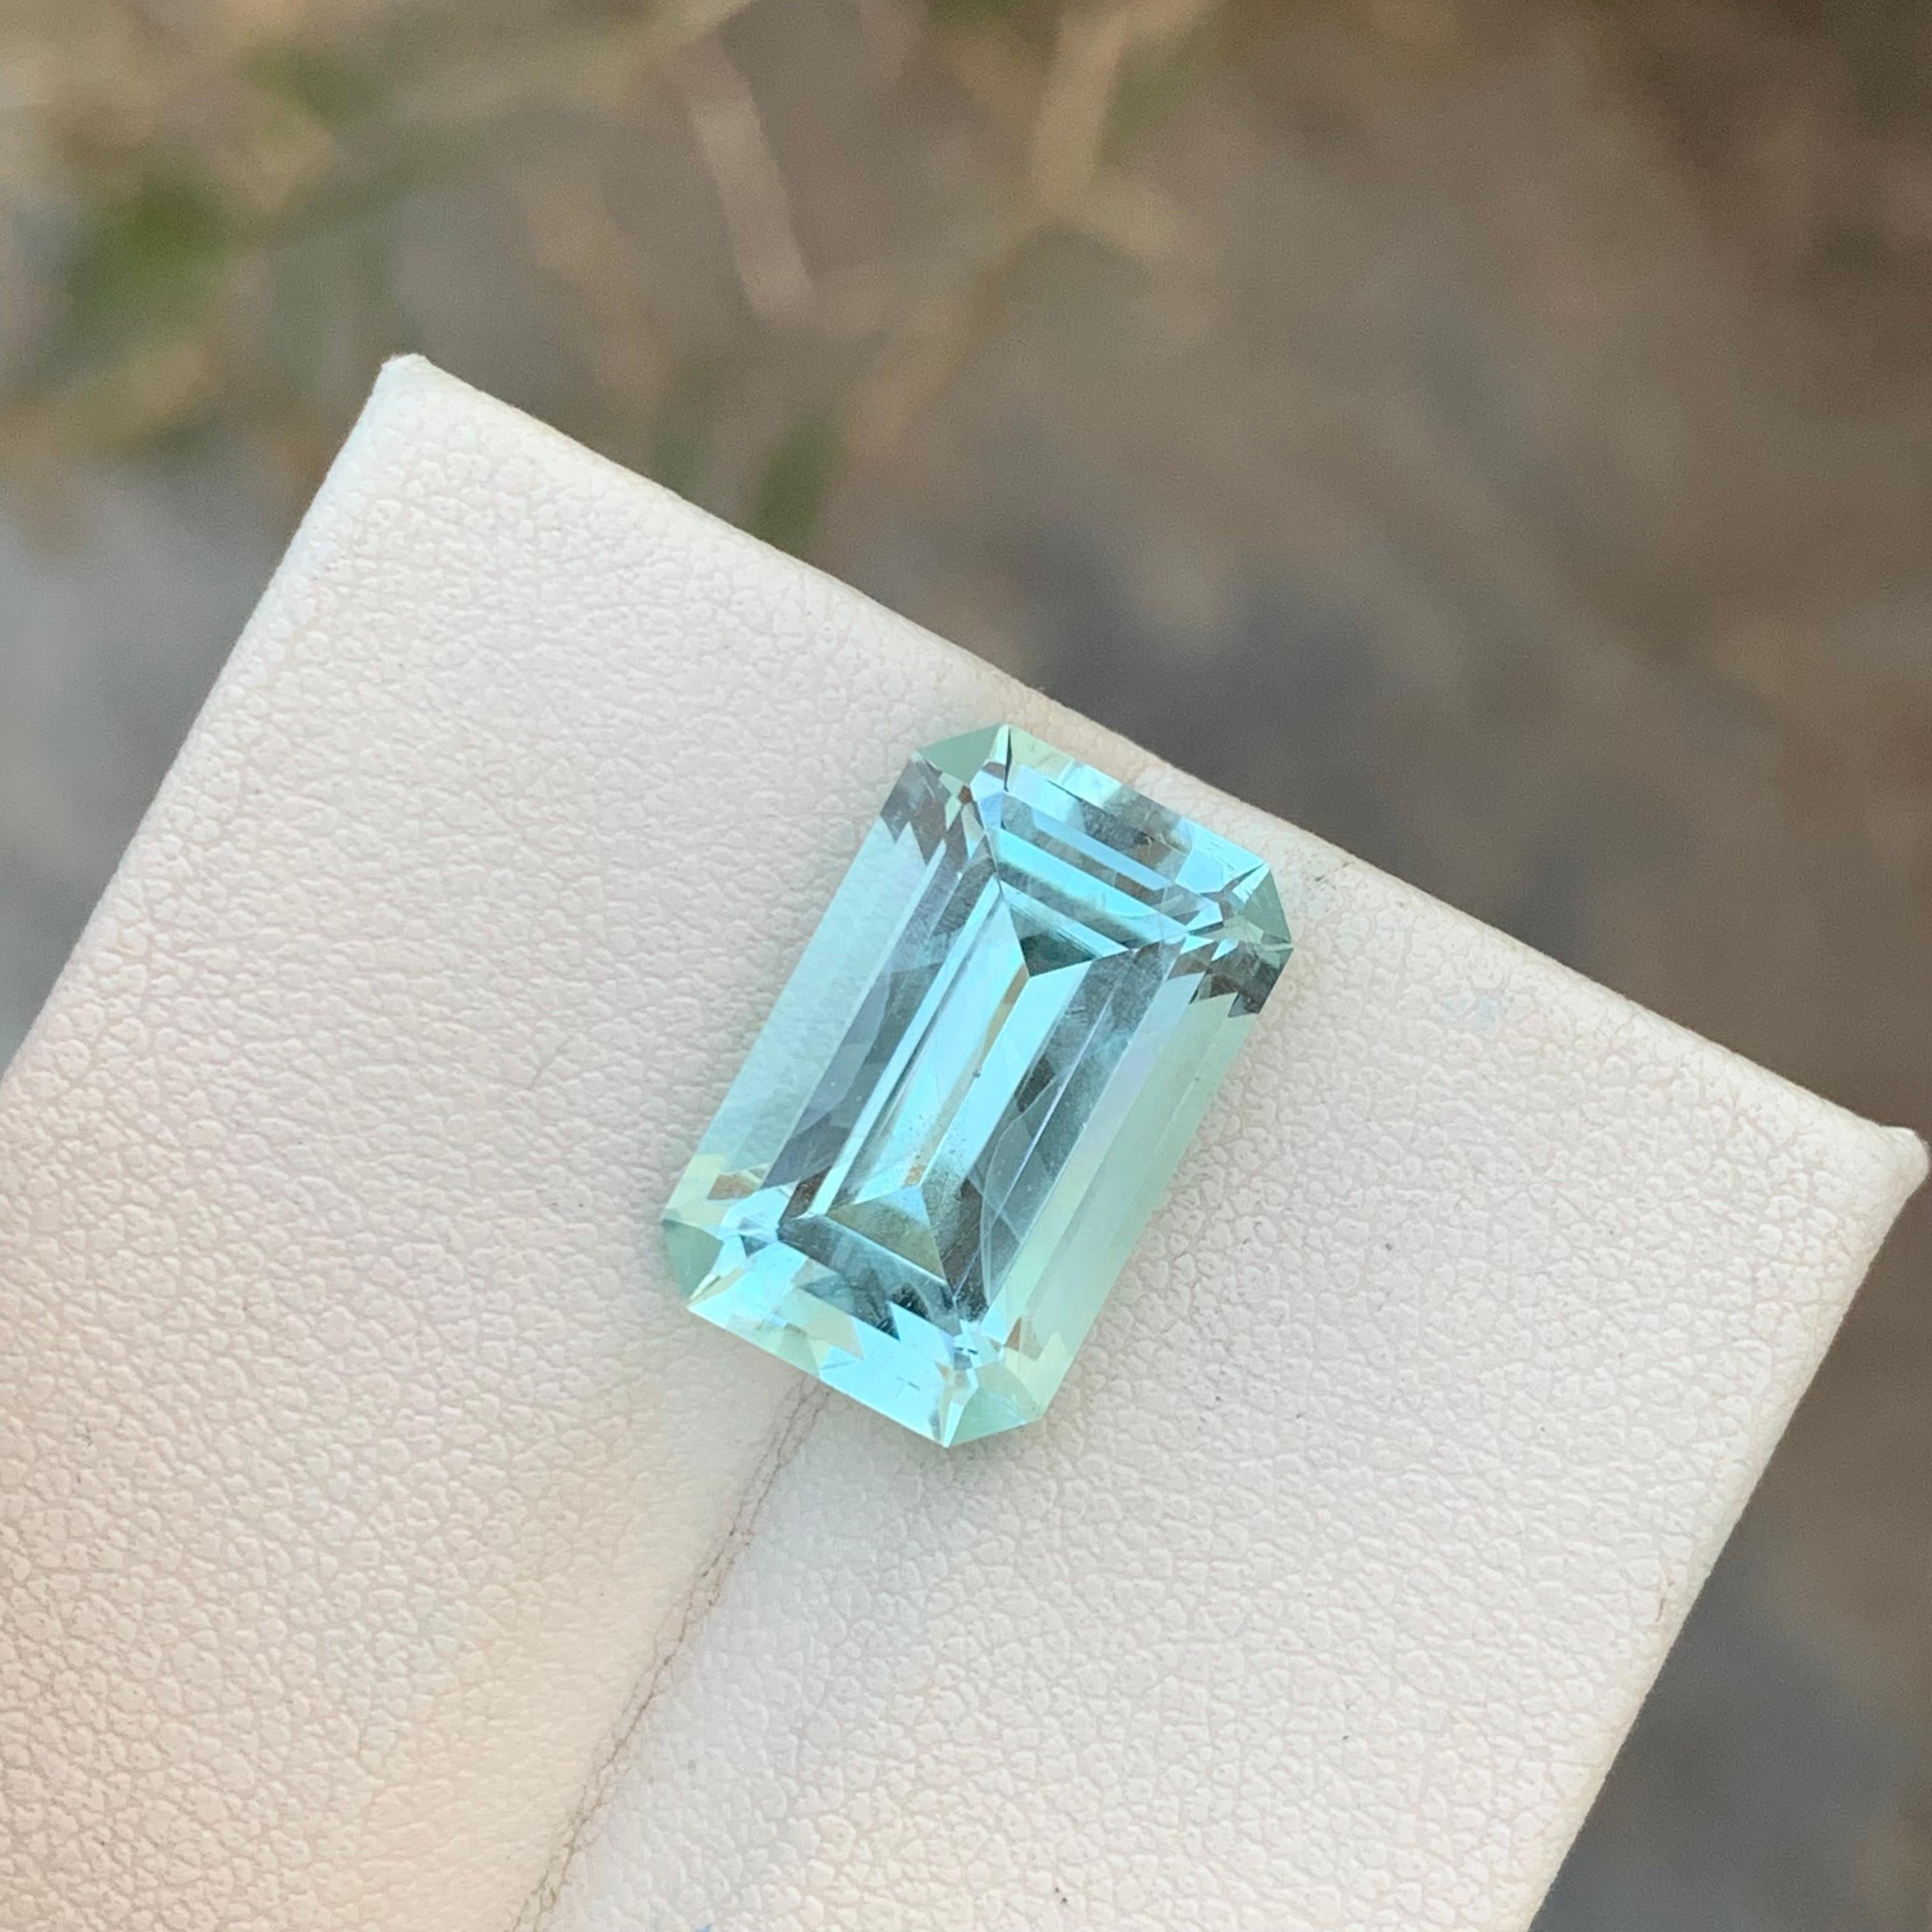 Loose Aquamarine
Weight: 8.20 Carat
Dimension: 15.7 x 10.1 x 7.2 Mm
Colour : Blue and white
Origin: Shigar Valley, Pakistan
Treatment: Non
Certificate : On Demand
Shape: Emerald

Aquamarine is a captivating gemstone known for its enchanting